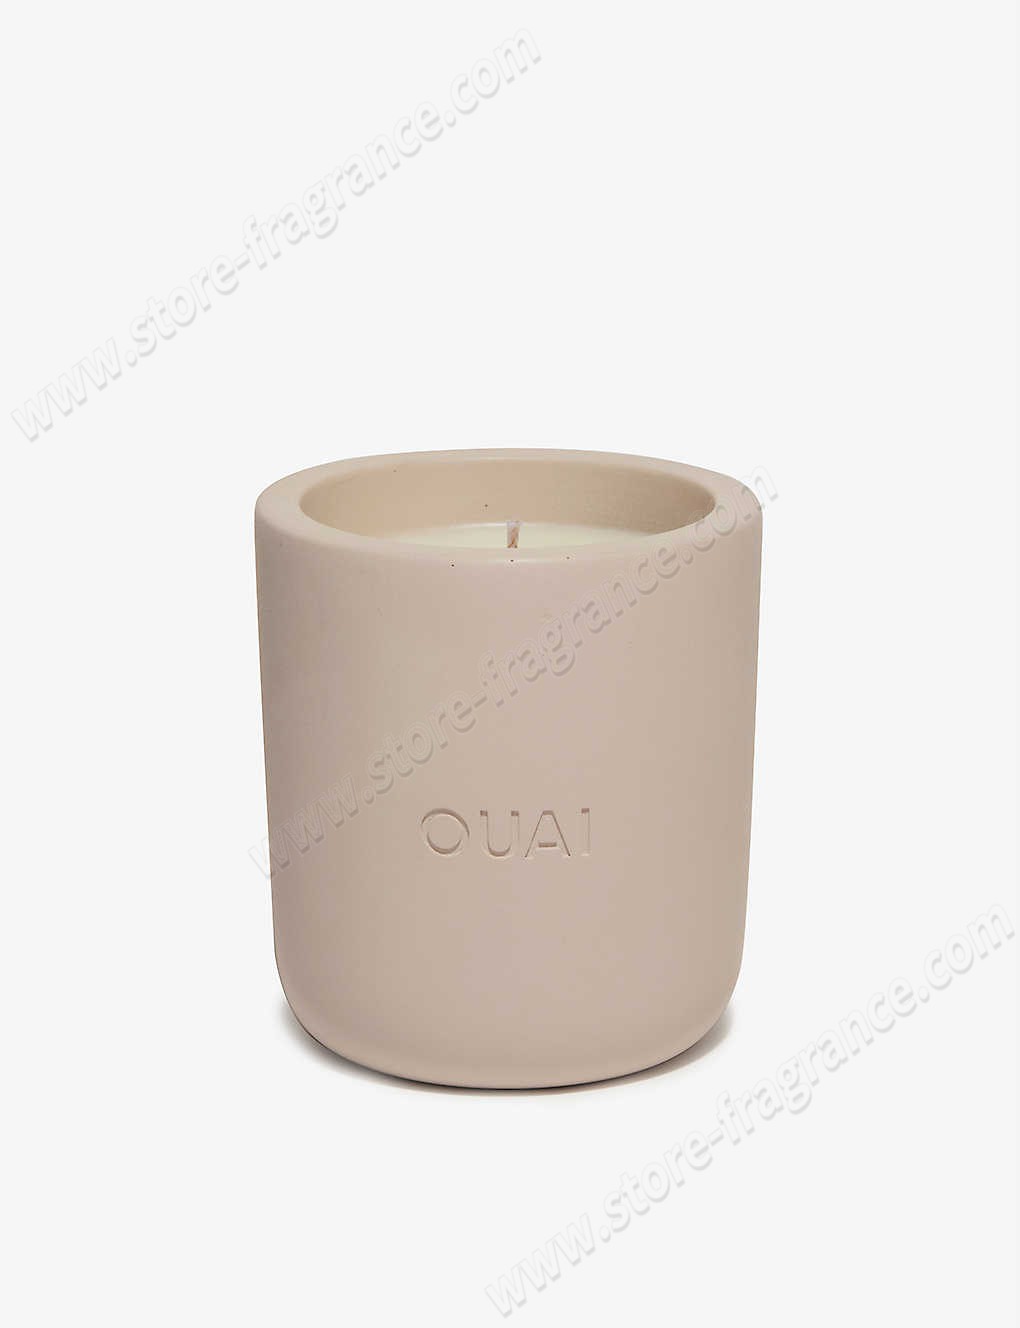 OUAI/Melrose Place scented candle 229g ✿ Discount Store - OUAI/Melrose Place scented candle 229g ✿ Discount Store